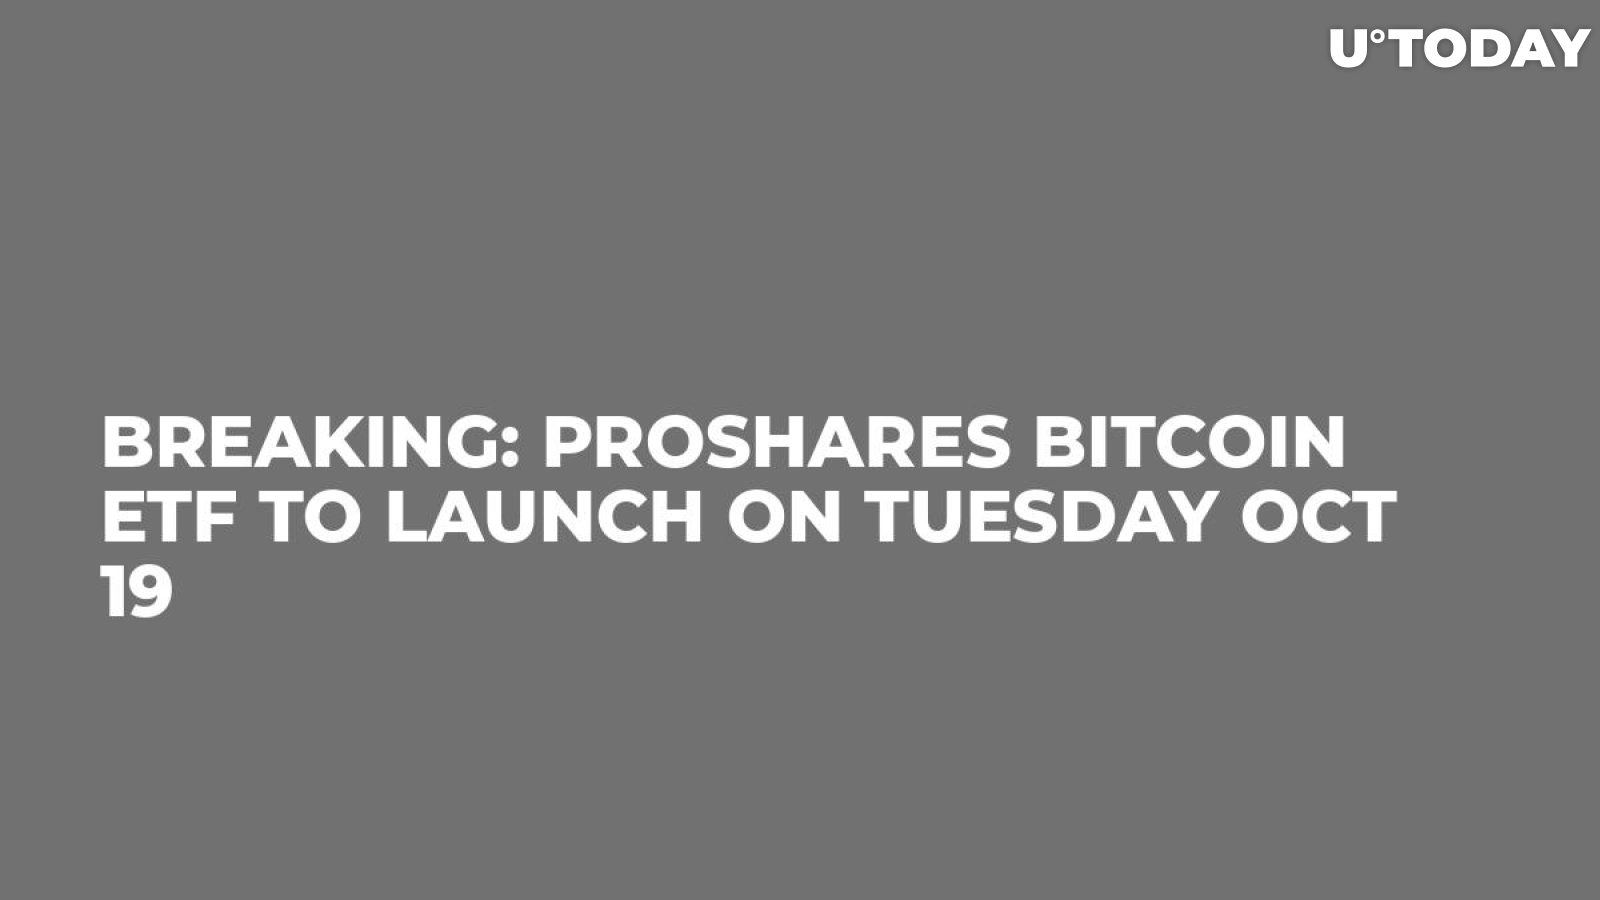 BREAKING: ProShares Bitcoin ETF to Launch on Tuesday Oct 19